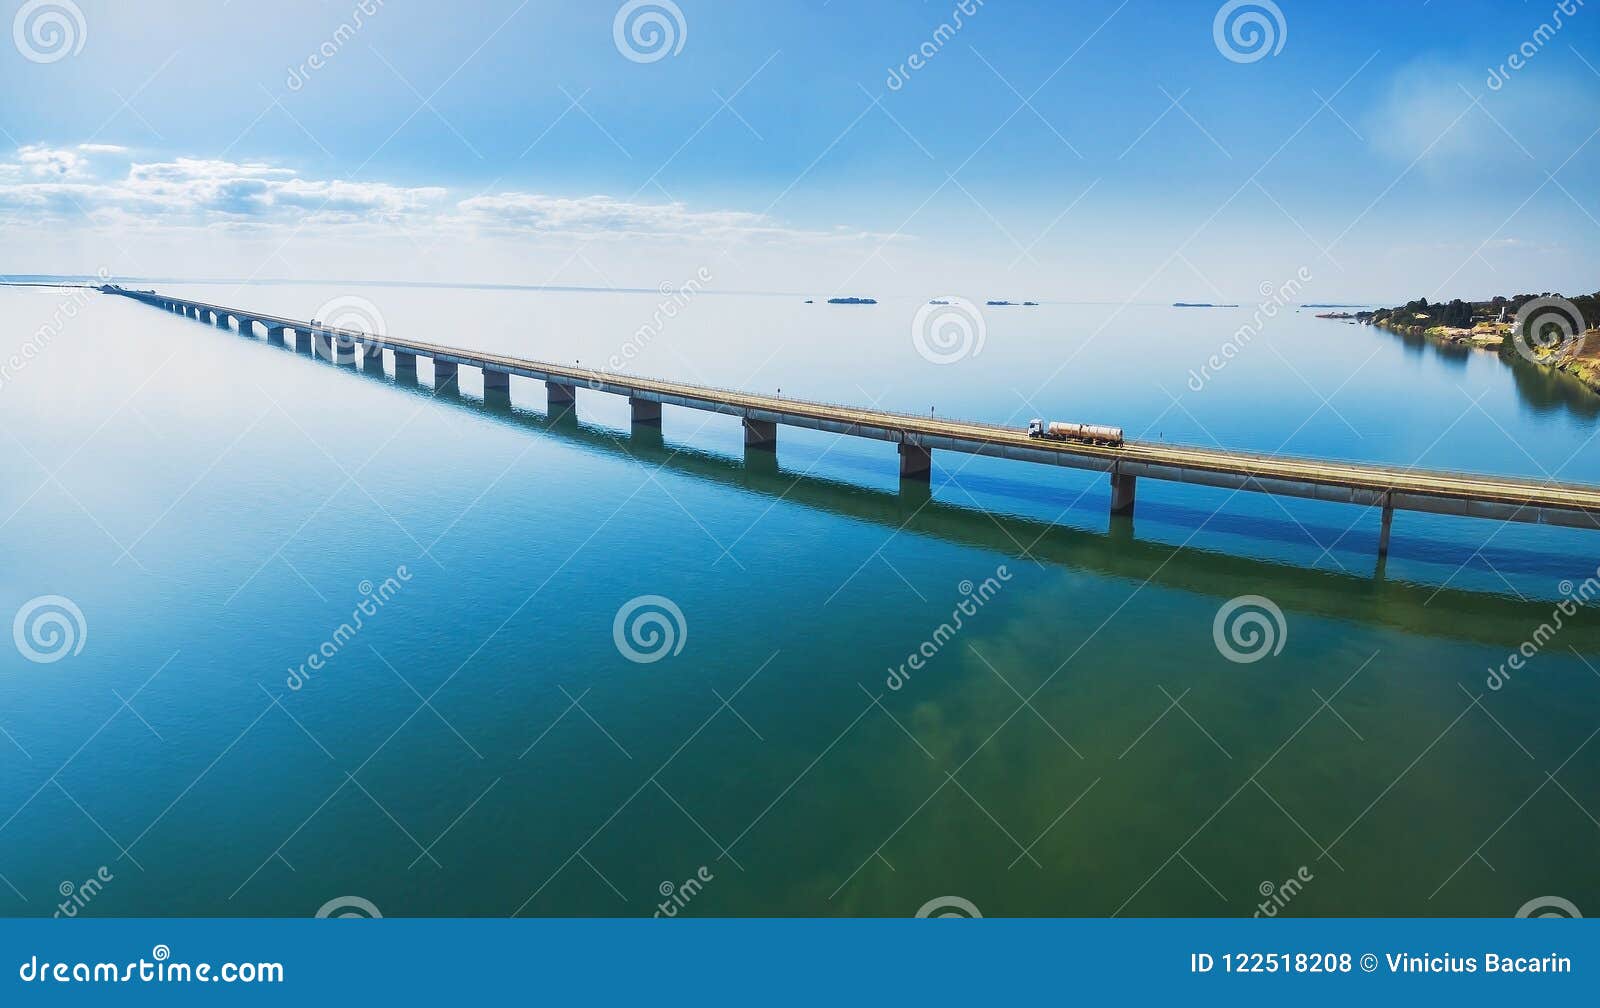 aerial view of a long highway bridge above a river.